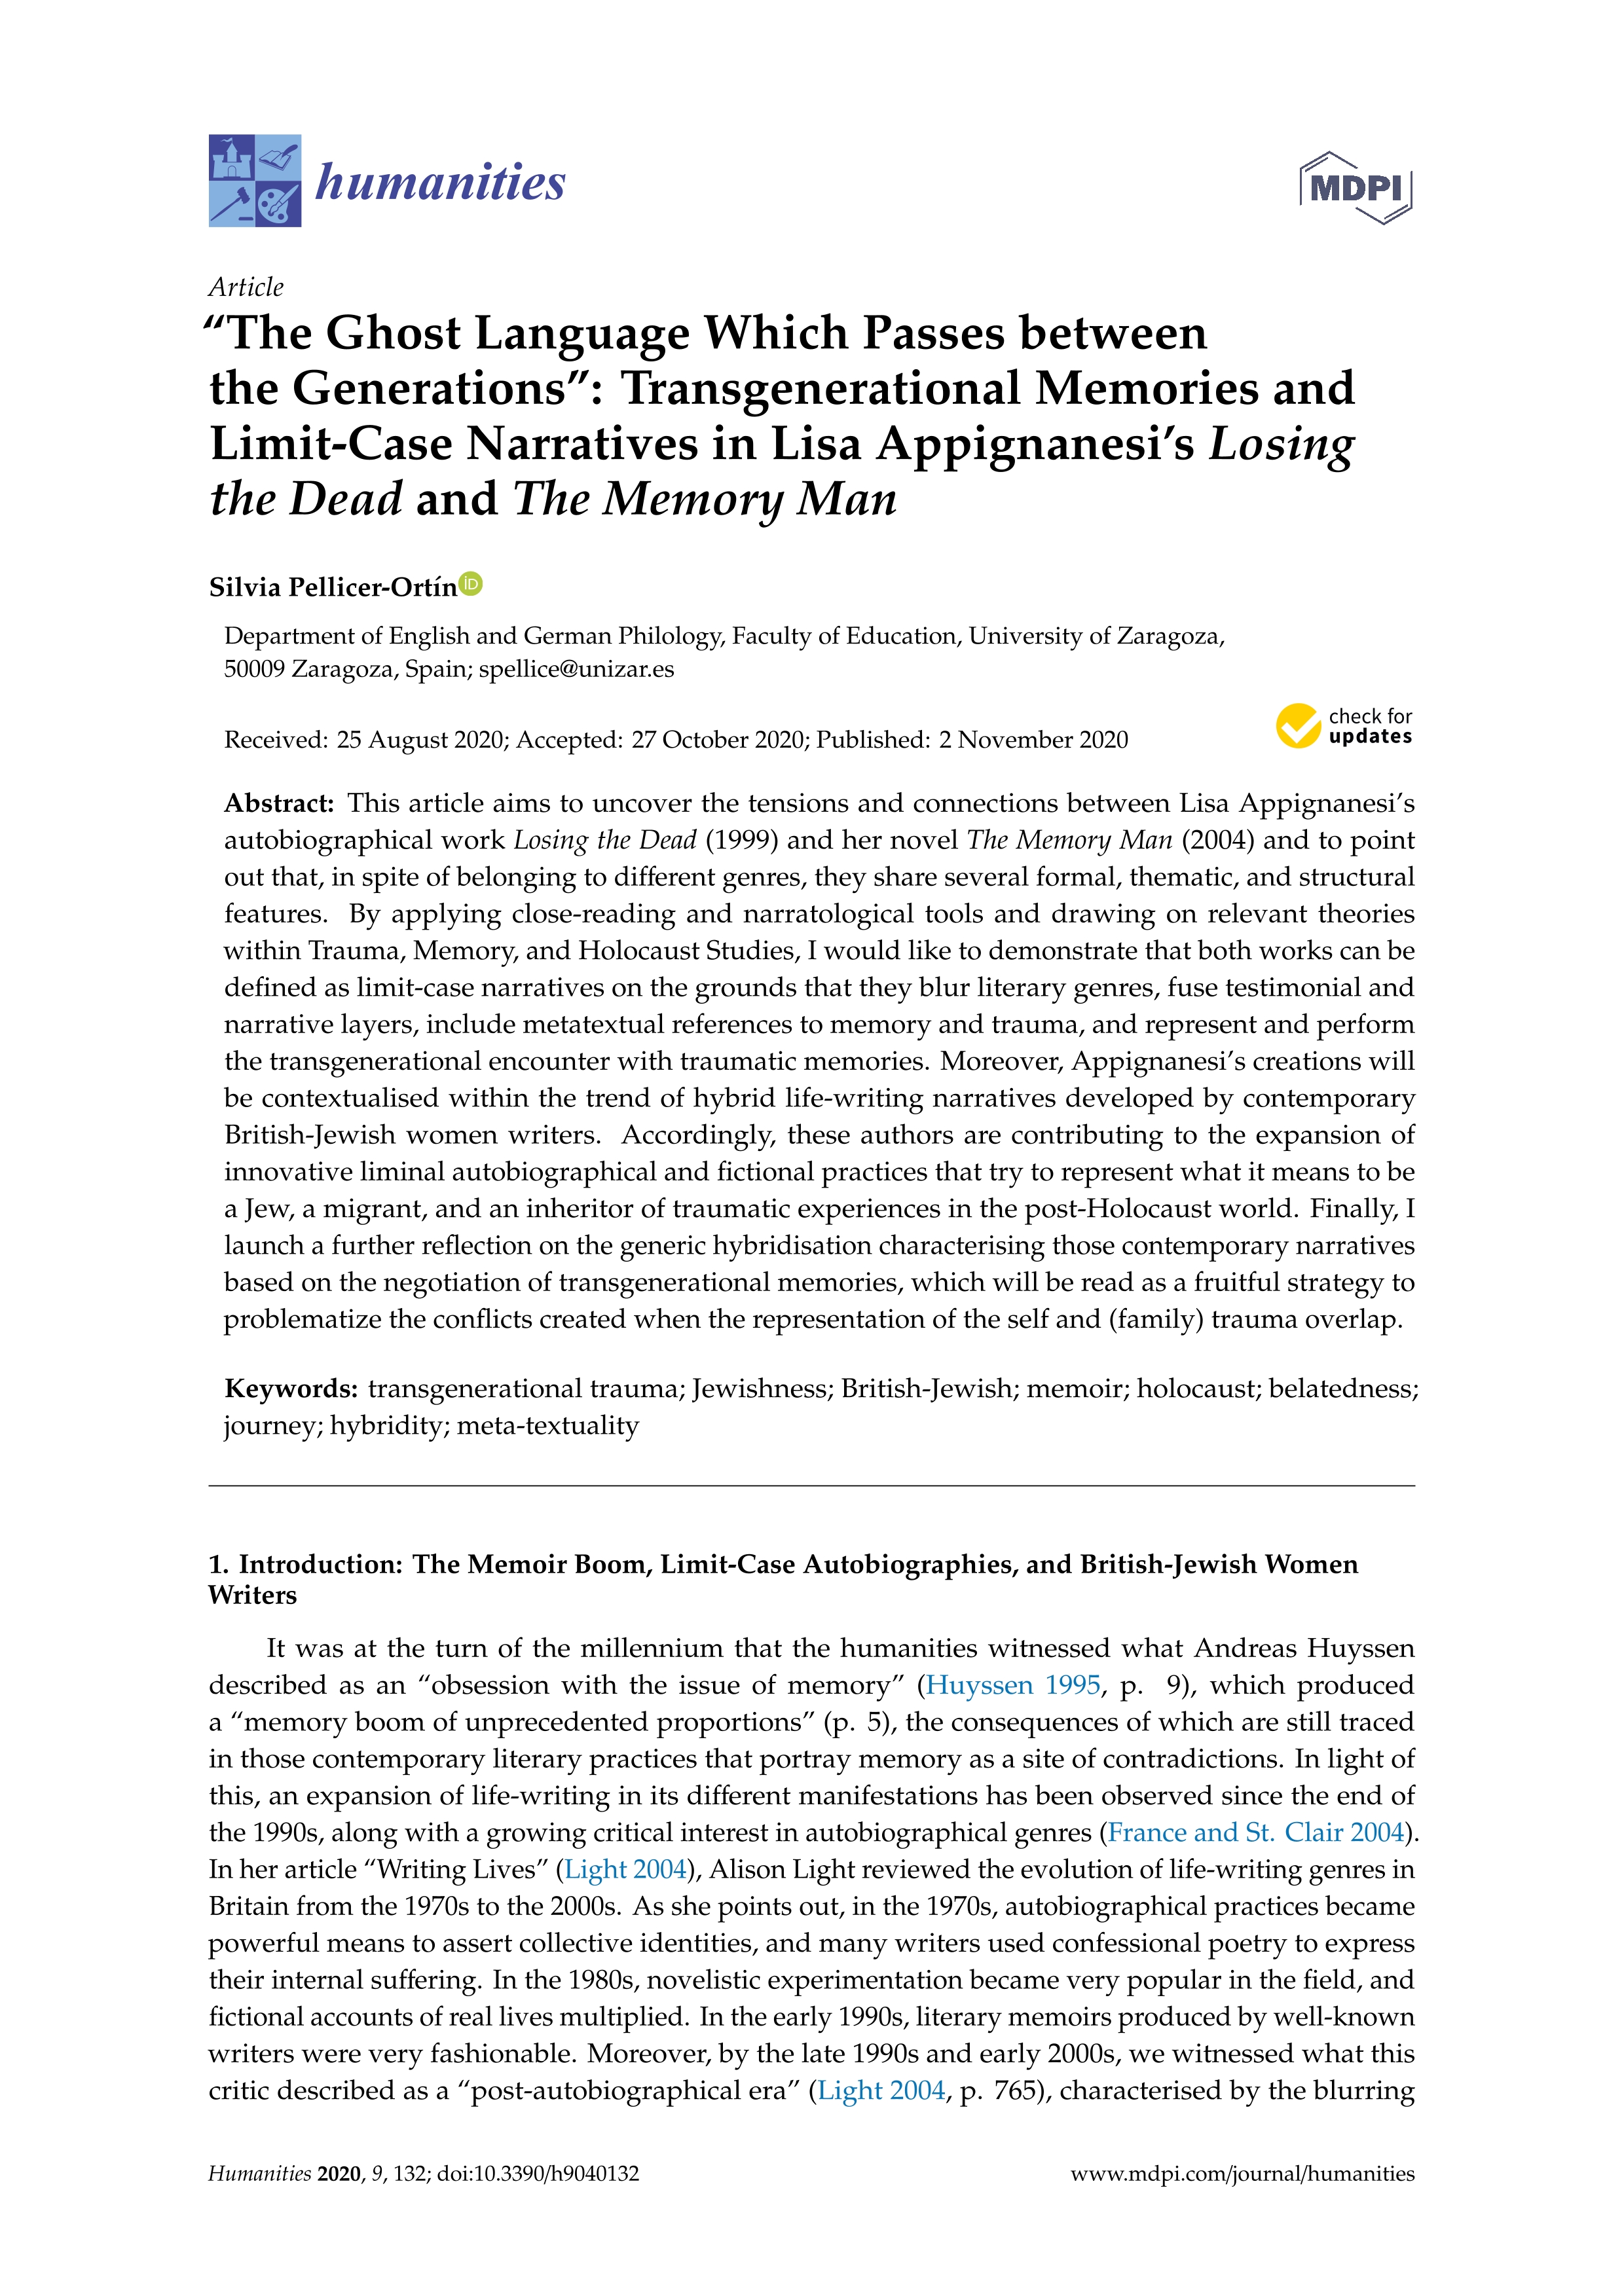 The ghost language which passes between the generations: transgenerational memories and limit-case narratives in Lisa Appignanesi’s losing the dead and the memory man